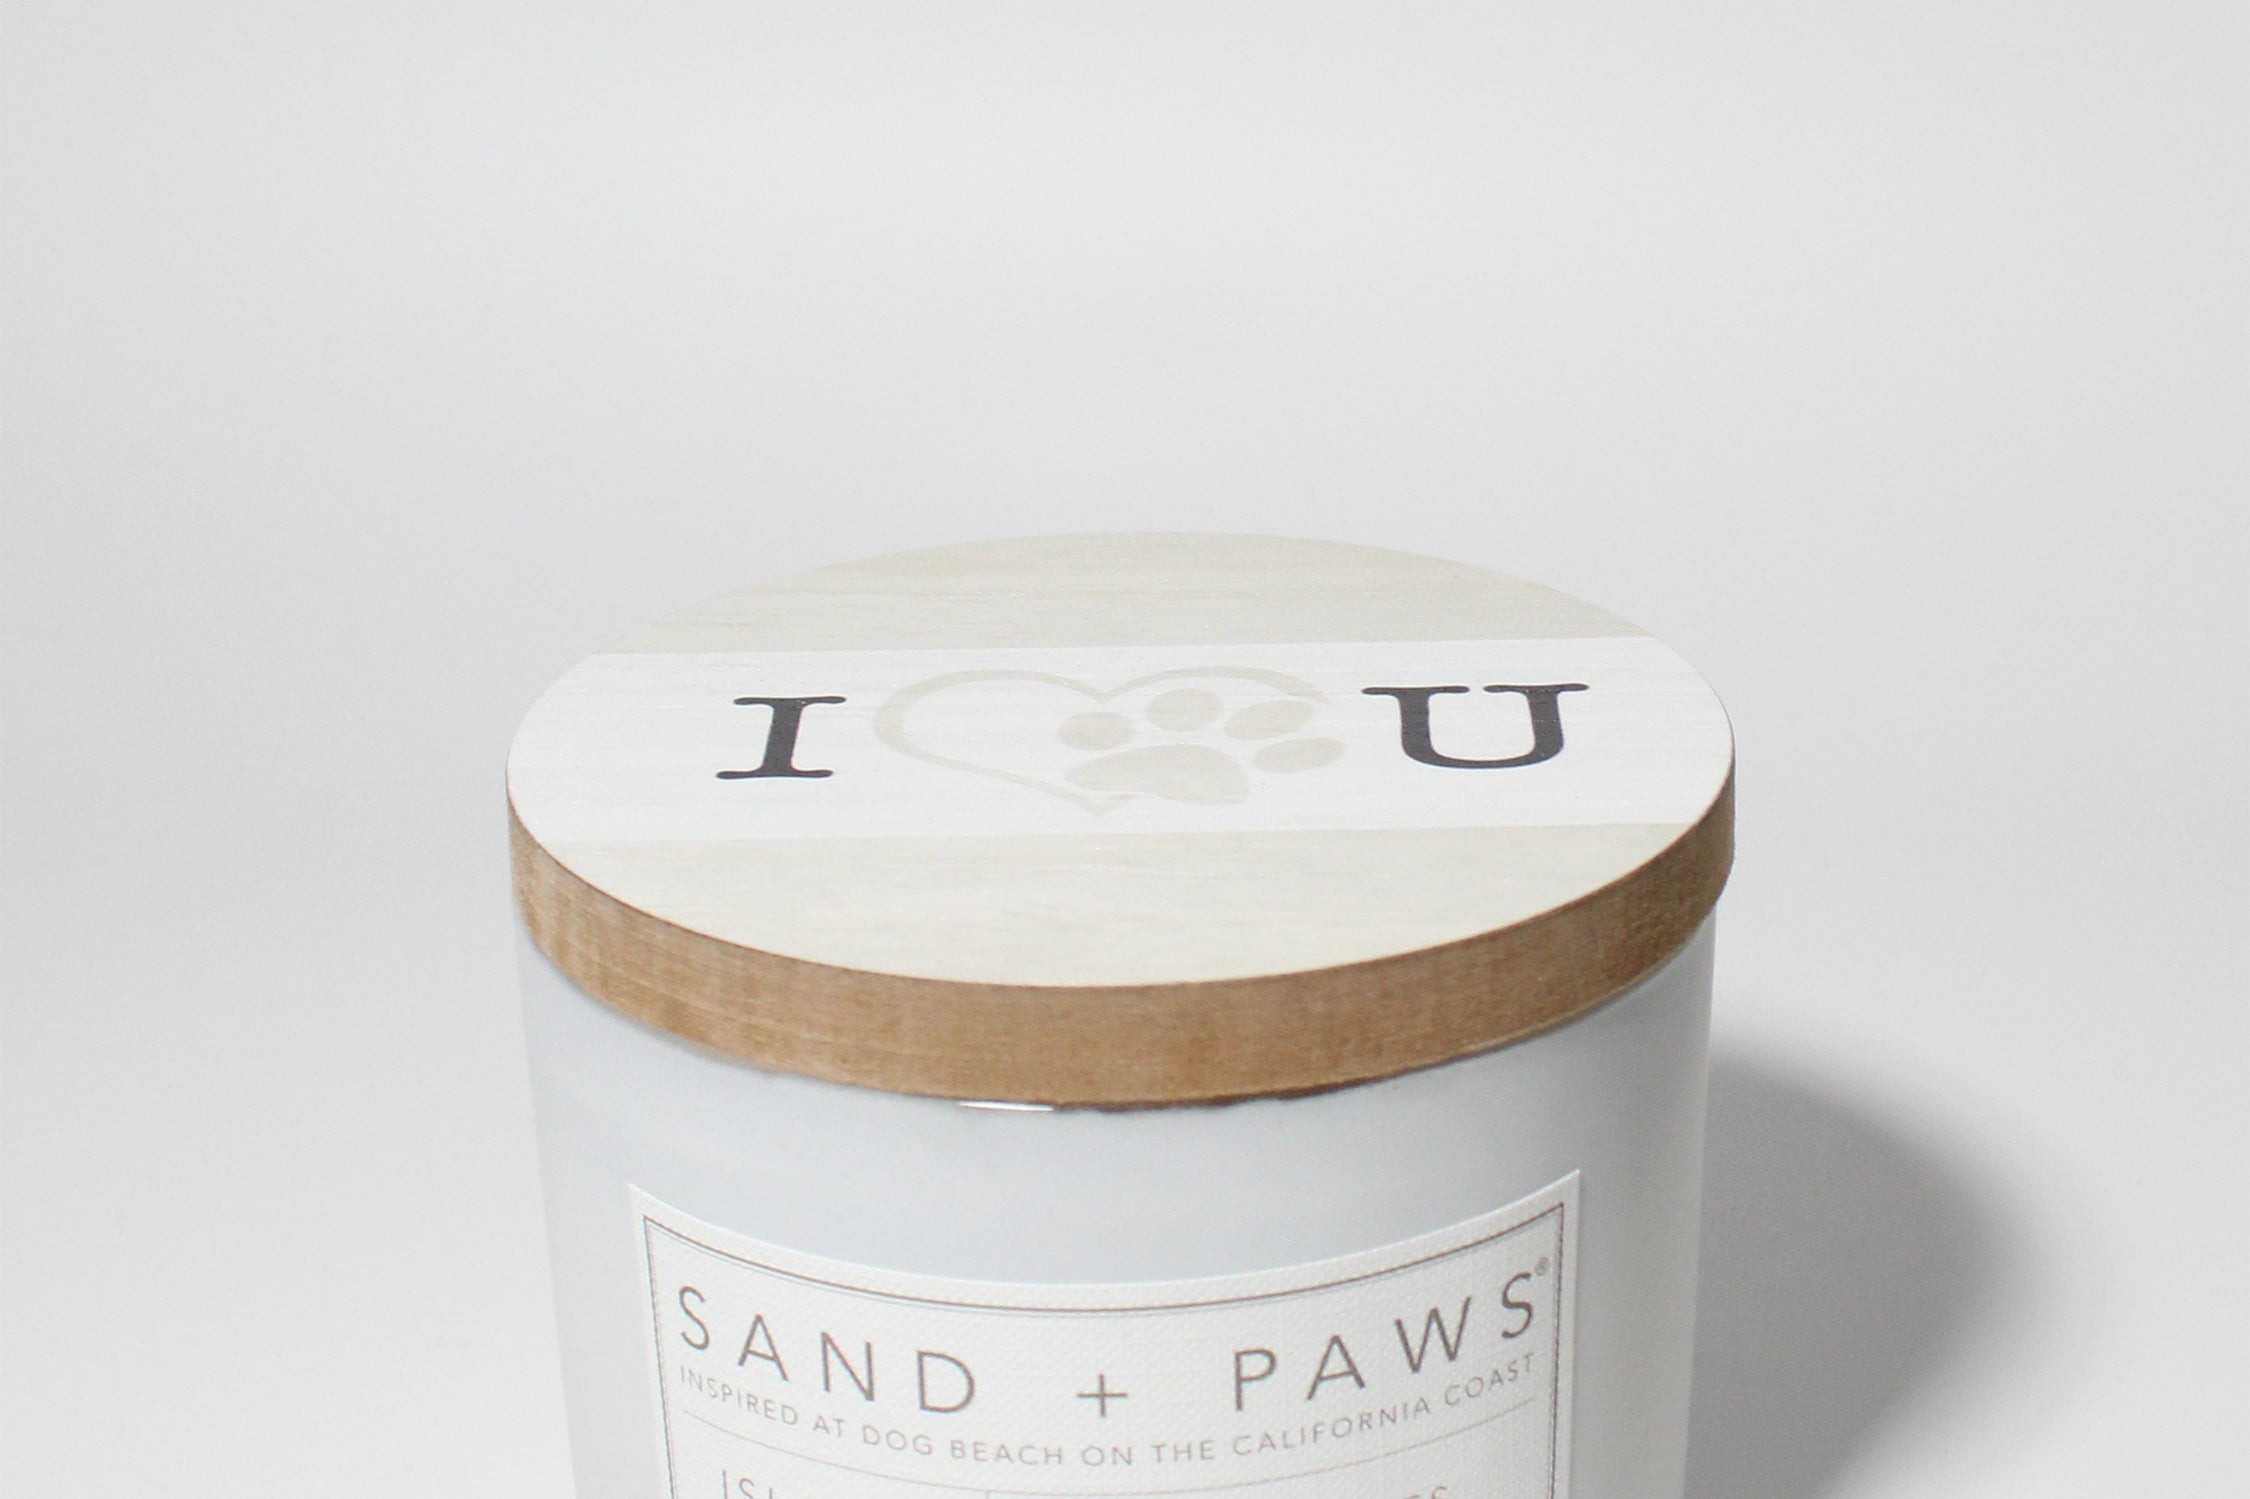 Sand + Paws Island Orchid 12 oz scented candle White Vessel with Painted I heart U lid